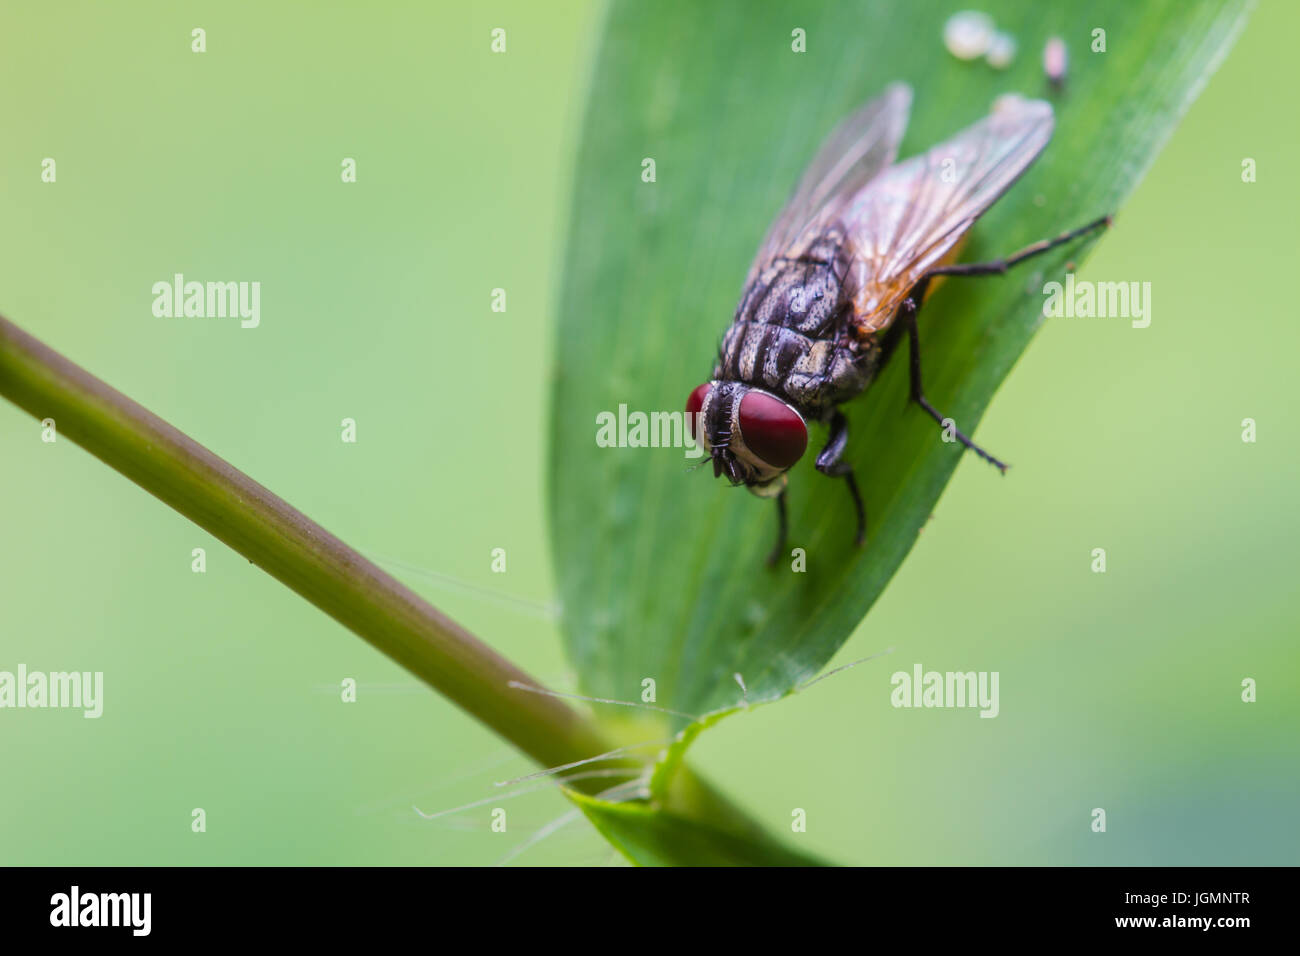 close up Blow fly, carrion fly, bluebottles, greenbottles, or cluster fly Stock Photo